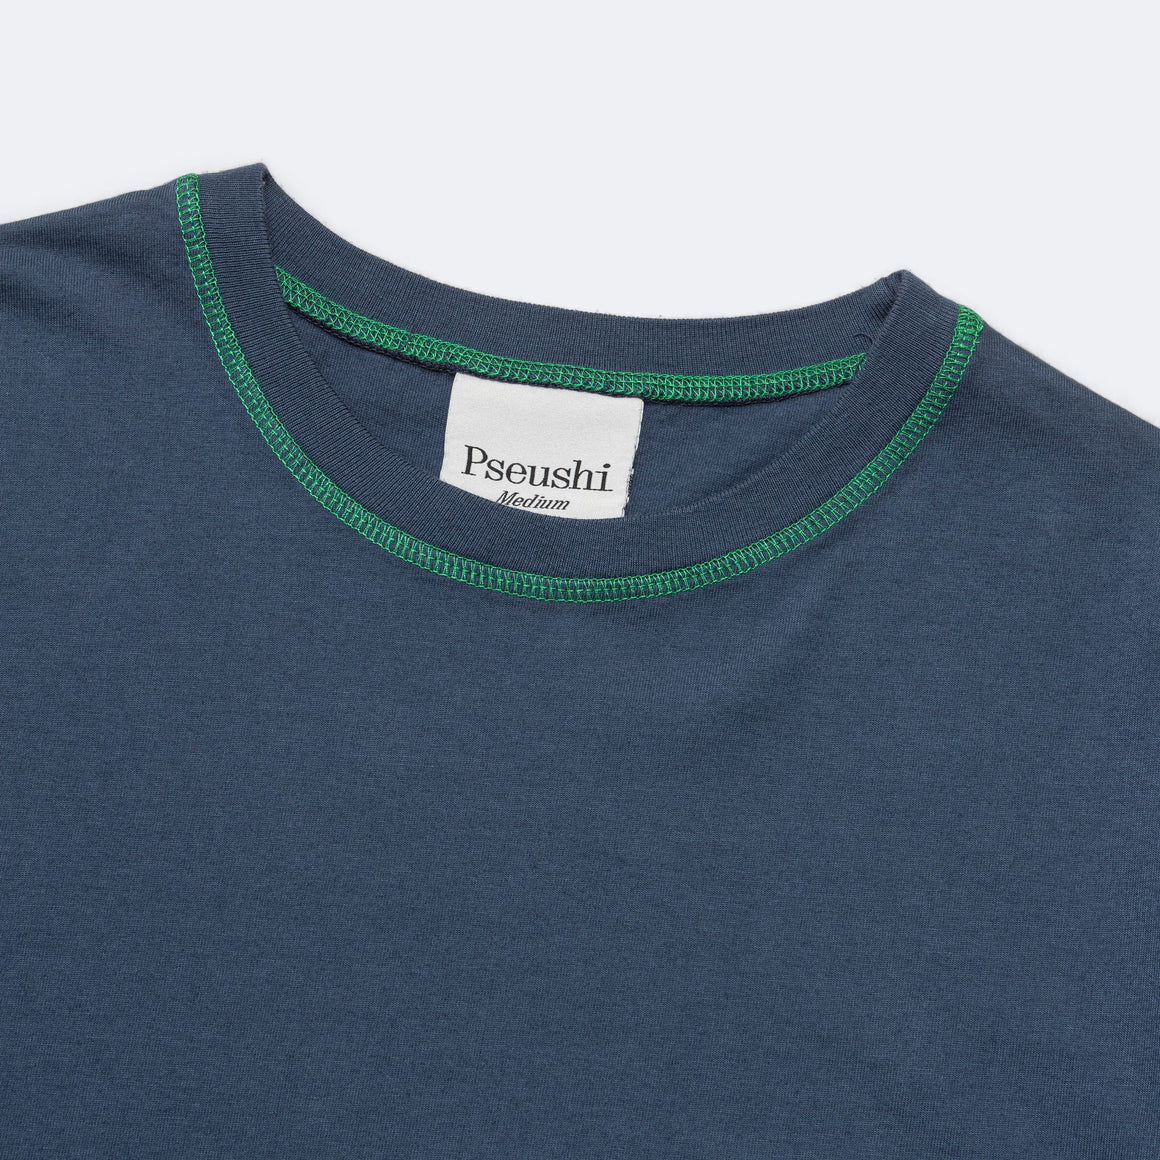 Pseushi - Contrast Stitch Tee - Navy/Green - UP THERE